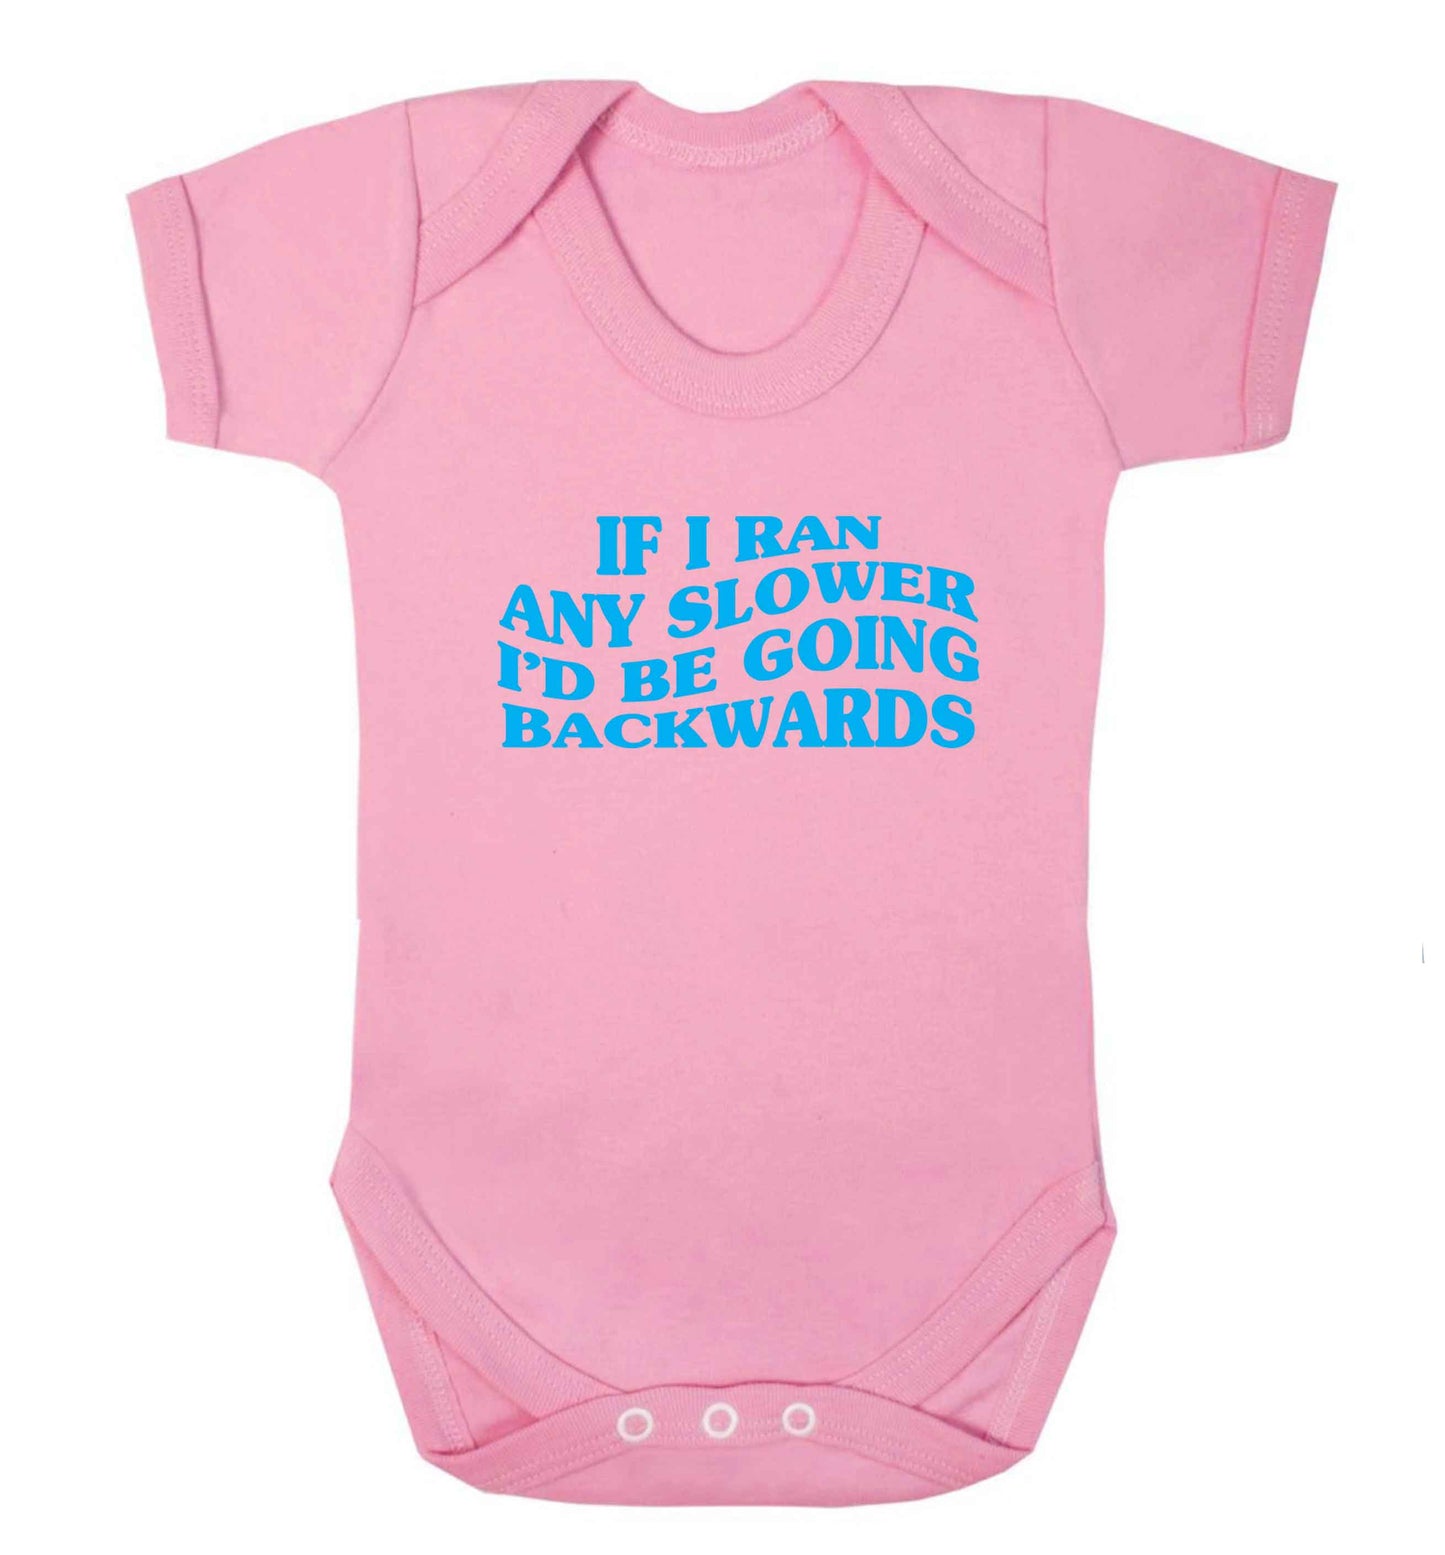 If I ran any slower I'd be going backwards baby vest pale pink 18-24 months